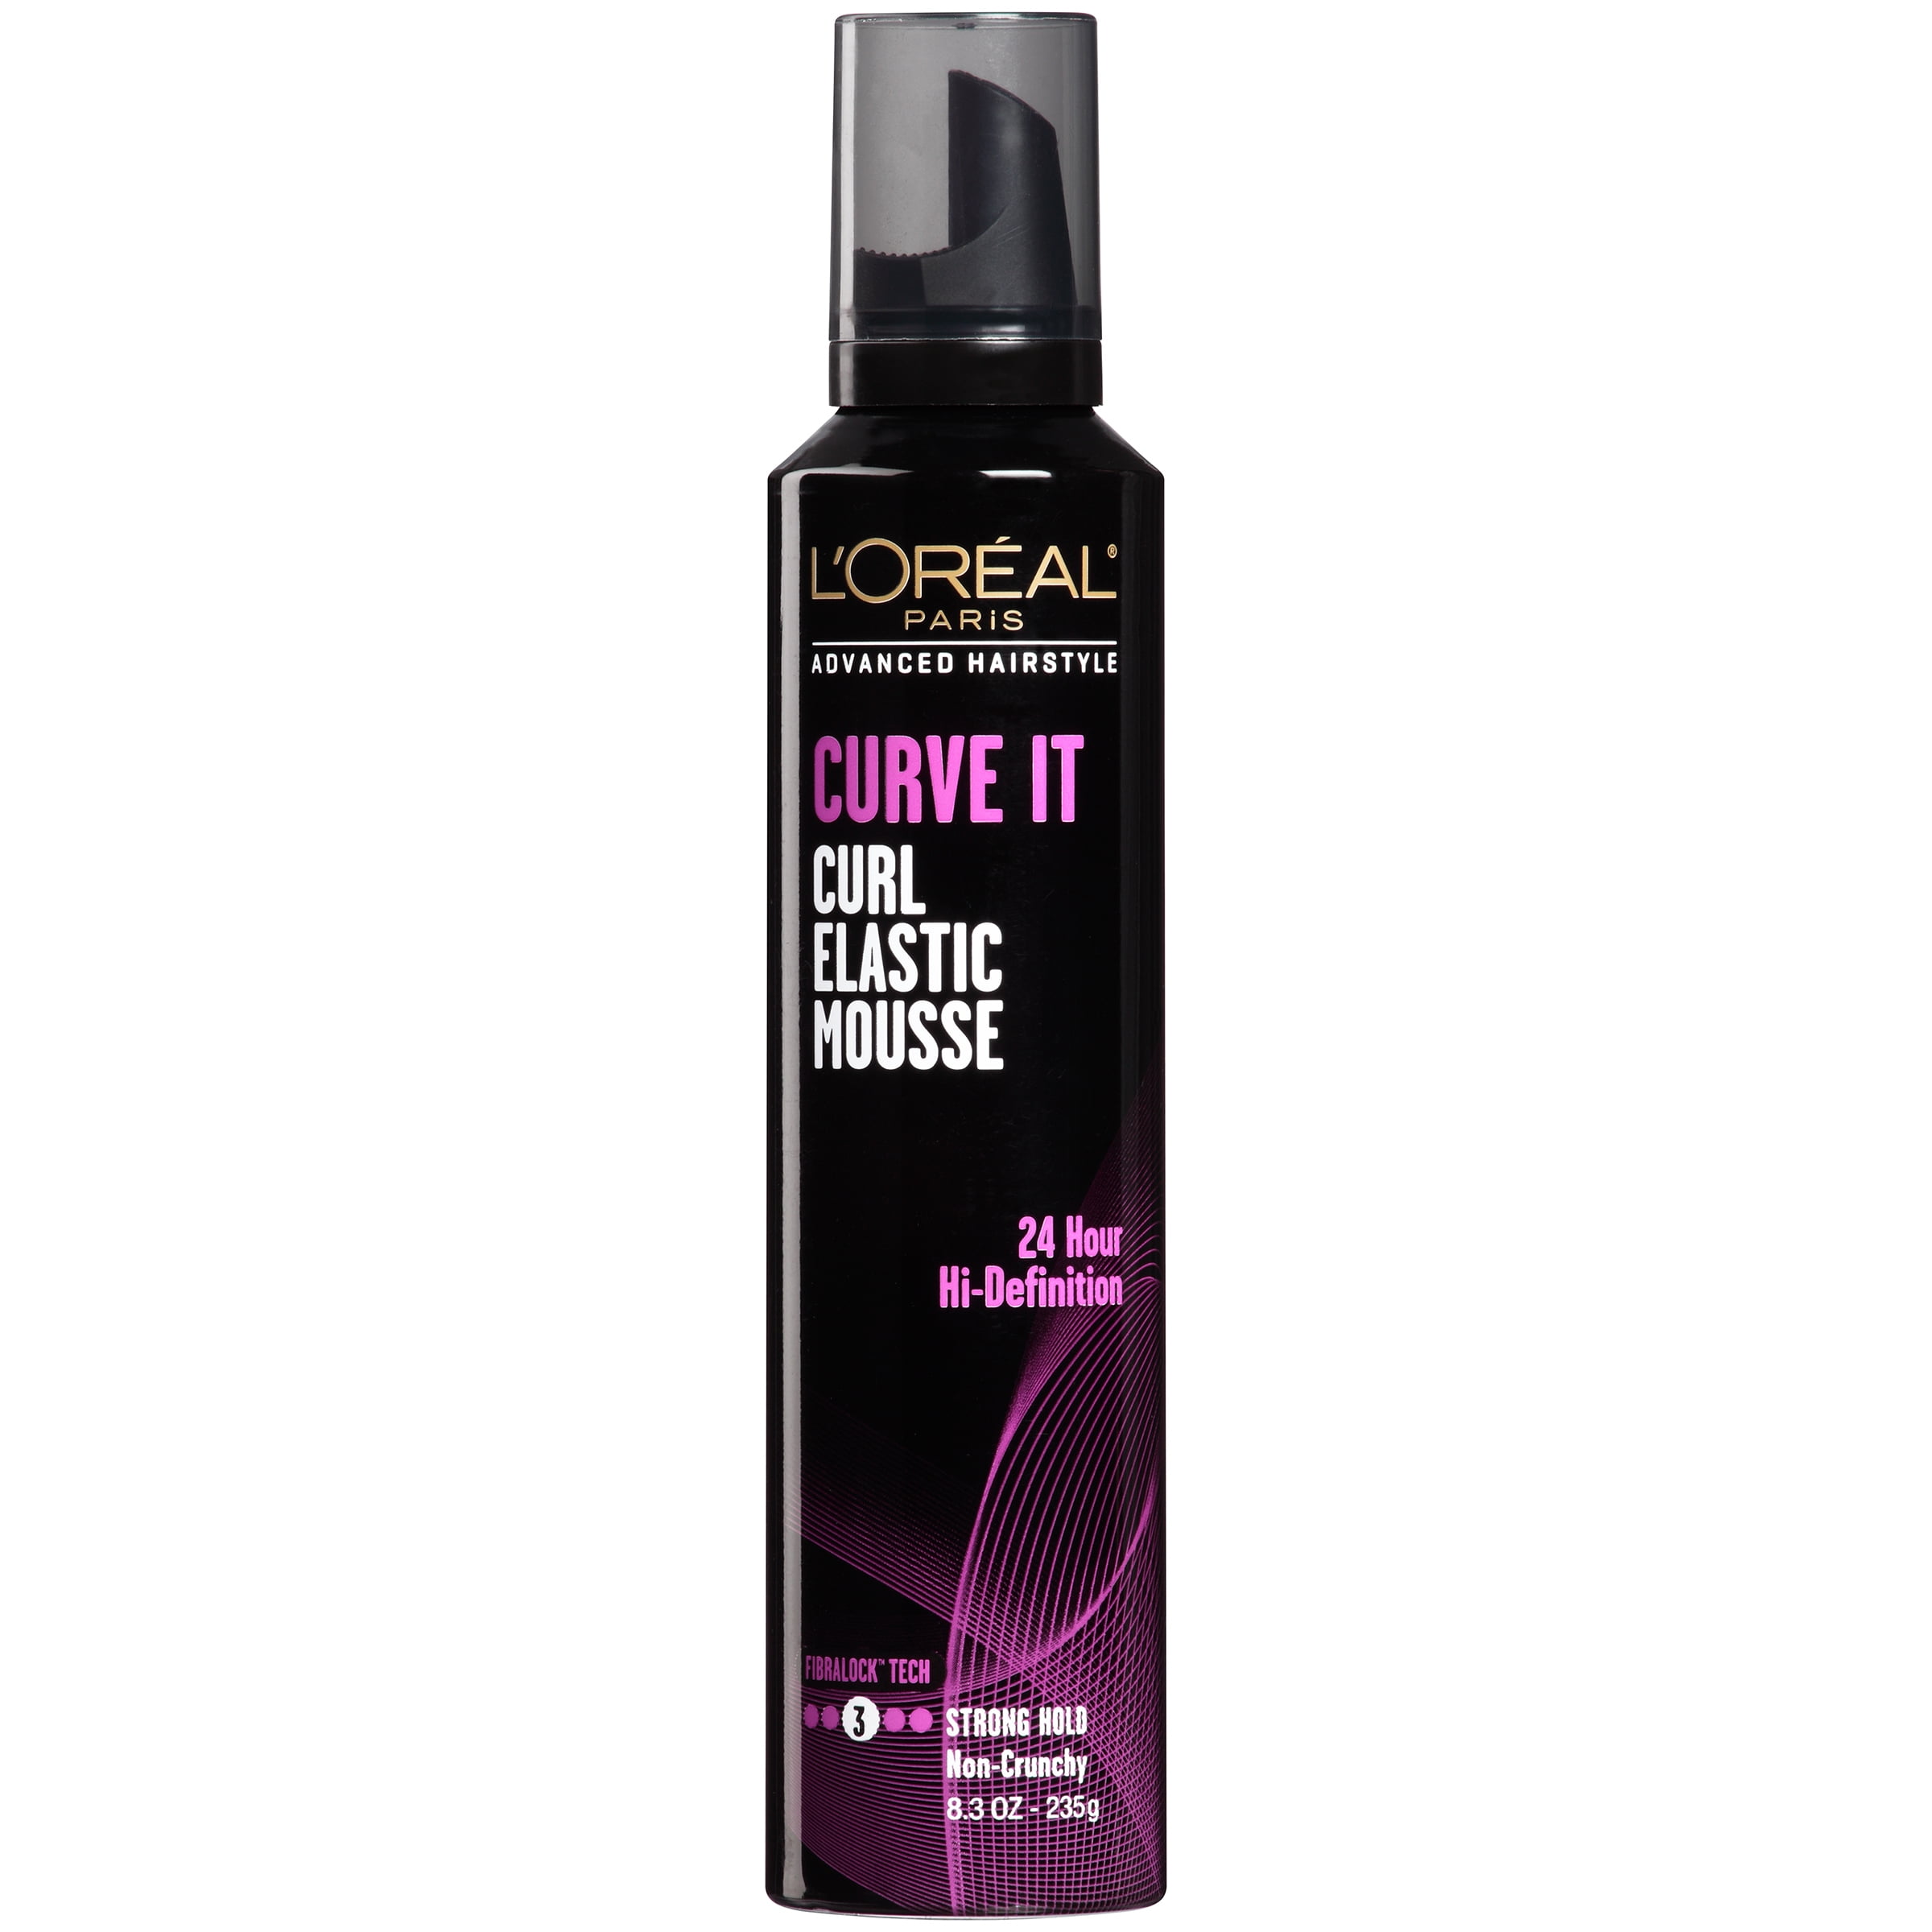 Buy LOreal Paris Advance Hairstyle Curve It Curl Enhancing Spray Hair  Styling Mousse,  oz Online at Lowest Price in Ubuy Zambia. 34202317